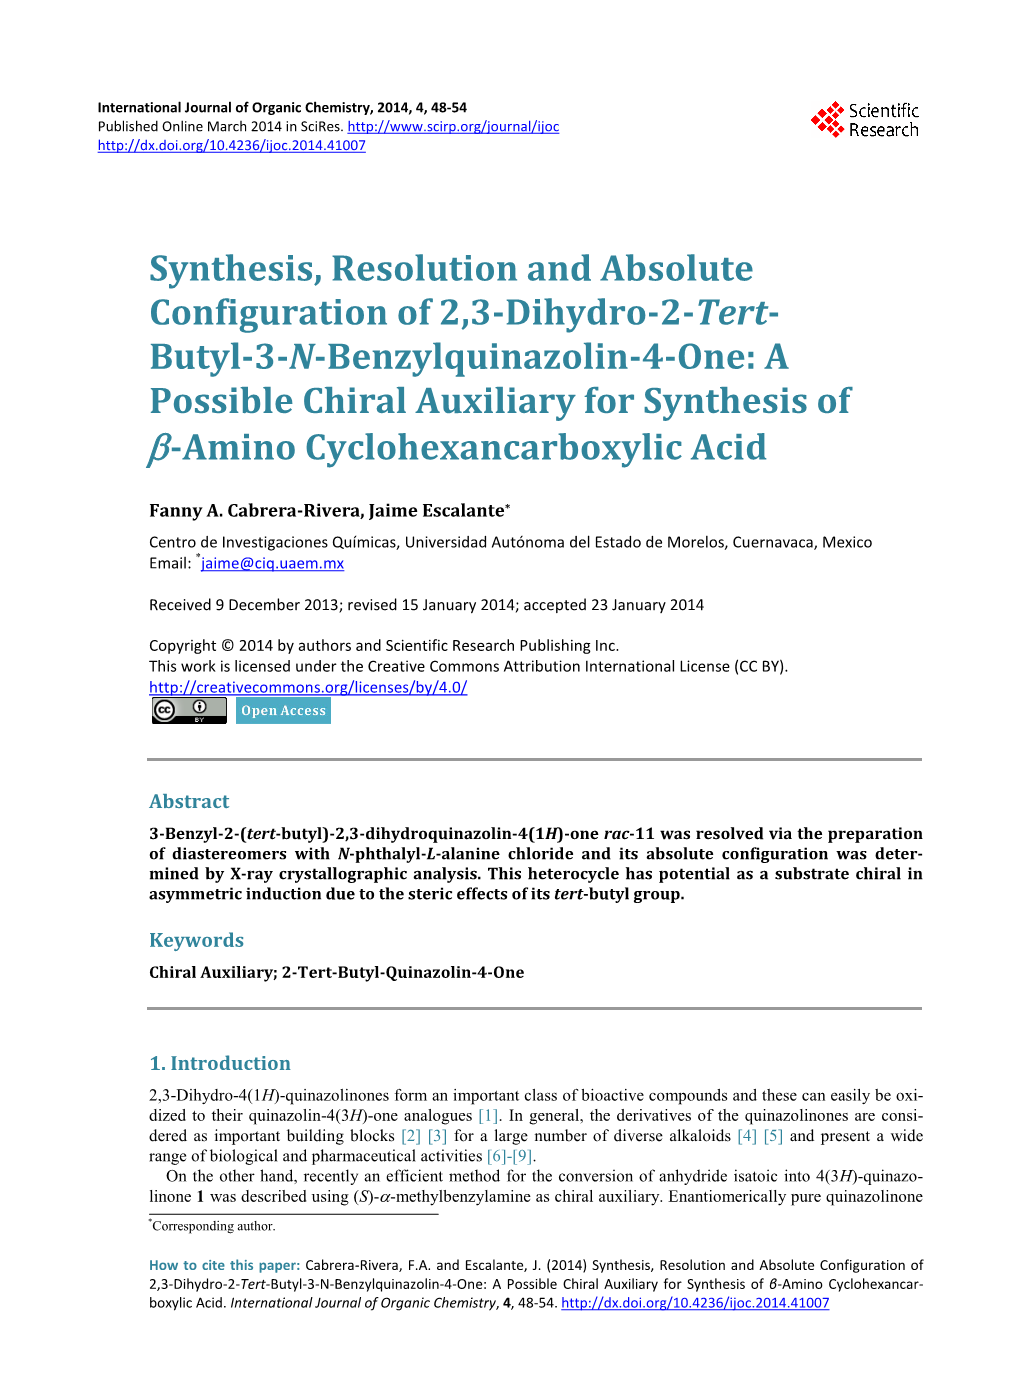 Synthesis, Resolution and Absolute Configuration of 2,3-Dihydro-2-Tert